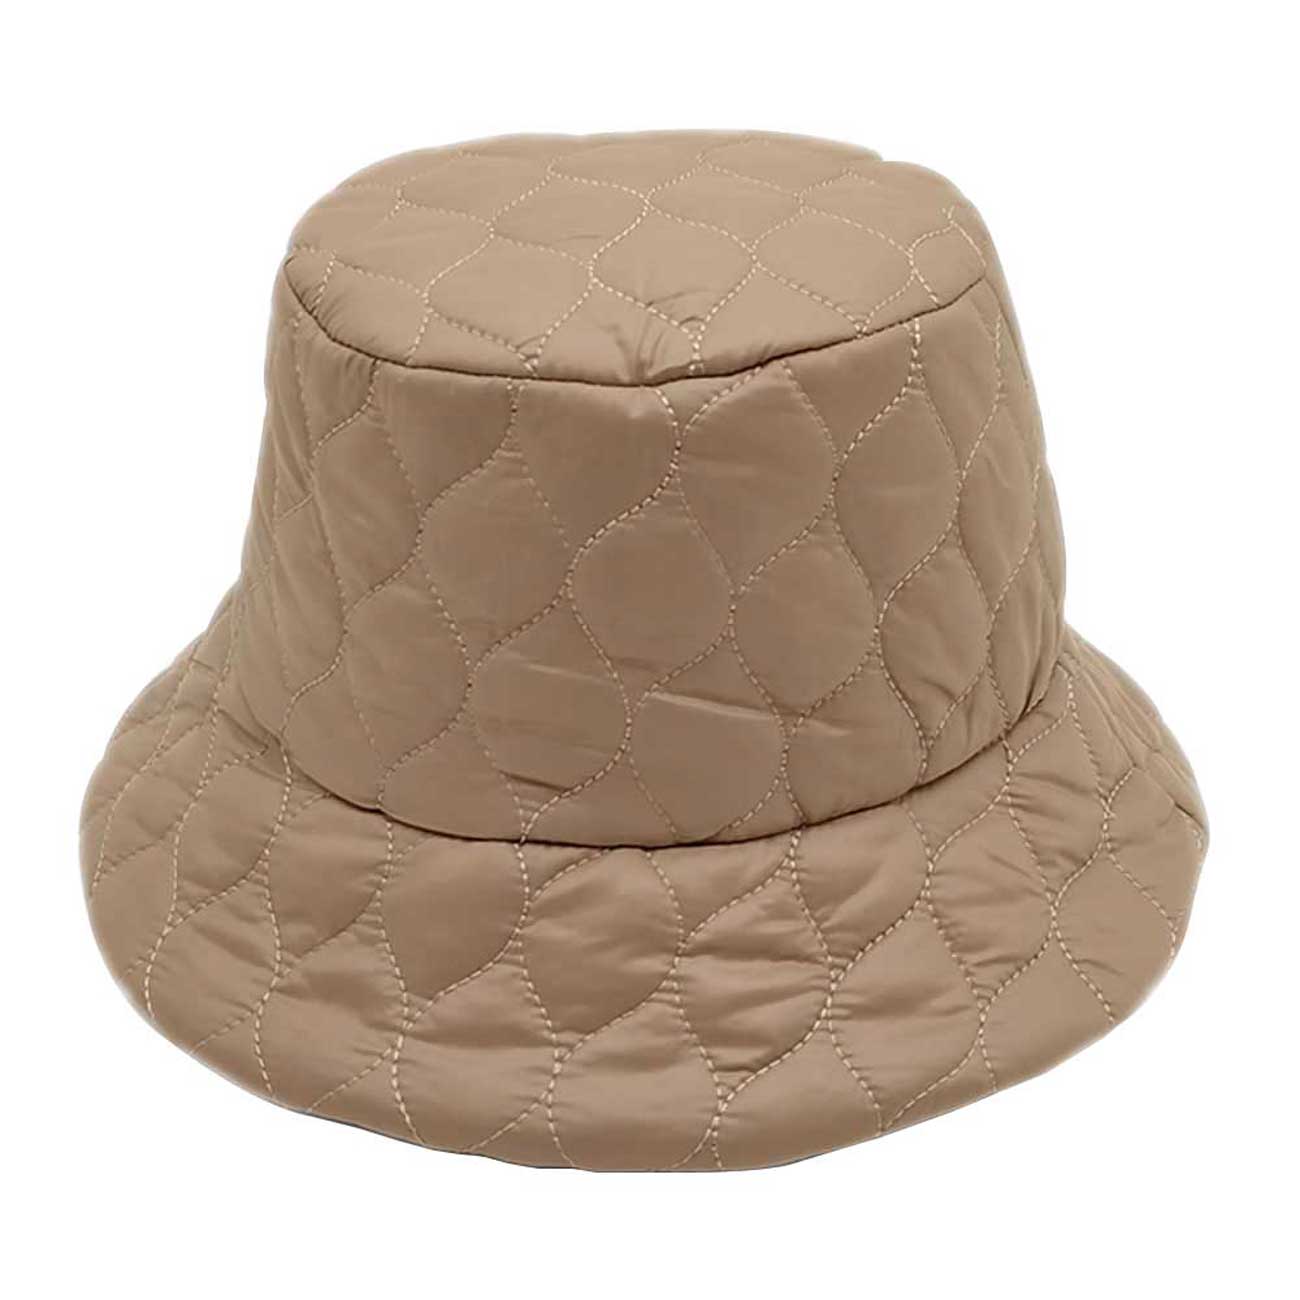 Taupe Wave Padded Bucket Hat, Show your trendy side with this chic Wave Padded Bucket Hat. Have fun and look Stylish anywhere outdoors. Great for covering up when you are having a bad hair day. Perfect for protecting you from the sun, rain, wind, snow, beach, pool, camping, or any outdoor activities. Amps up your outlook with confidence with this trendy bucket hat.